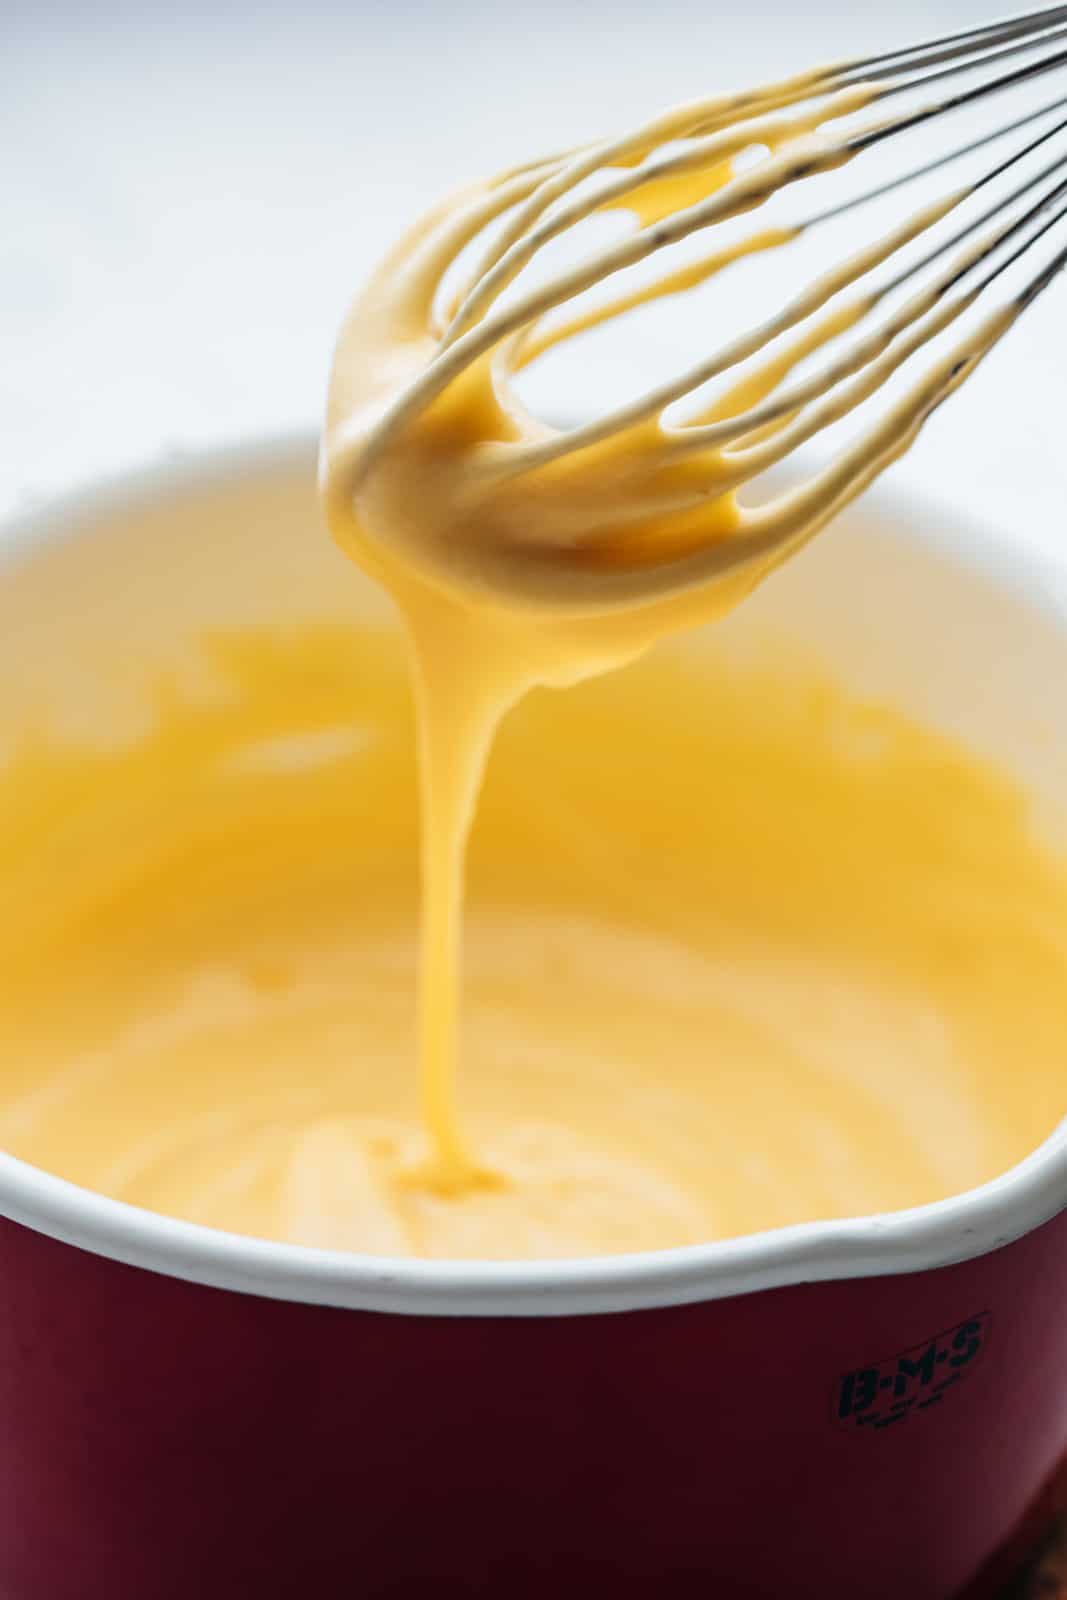 Spicy nacho cheese sauce consistency being shown with a whisk